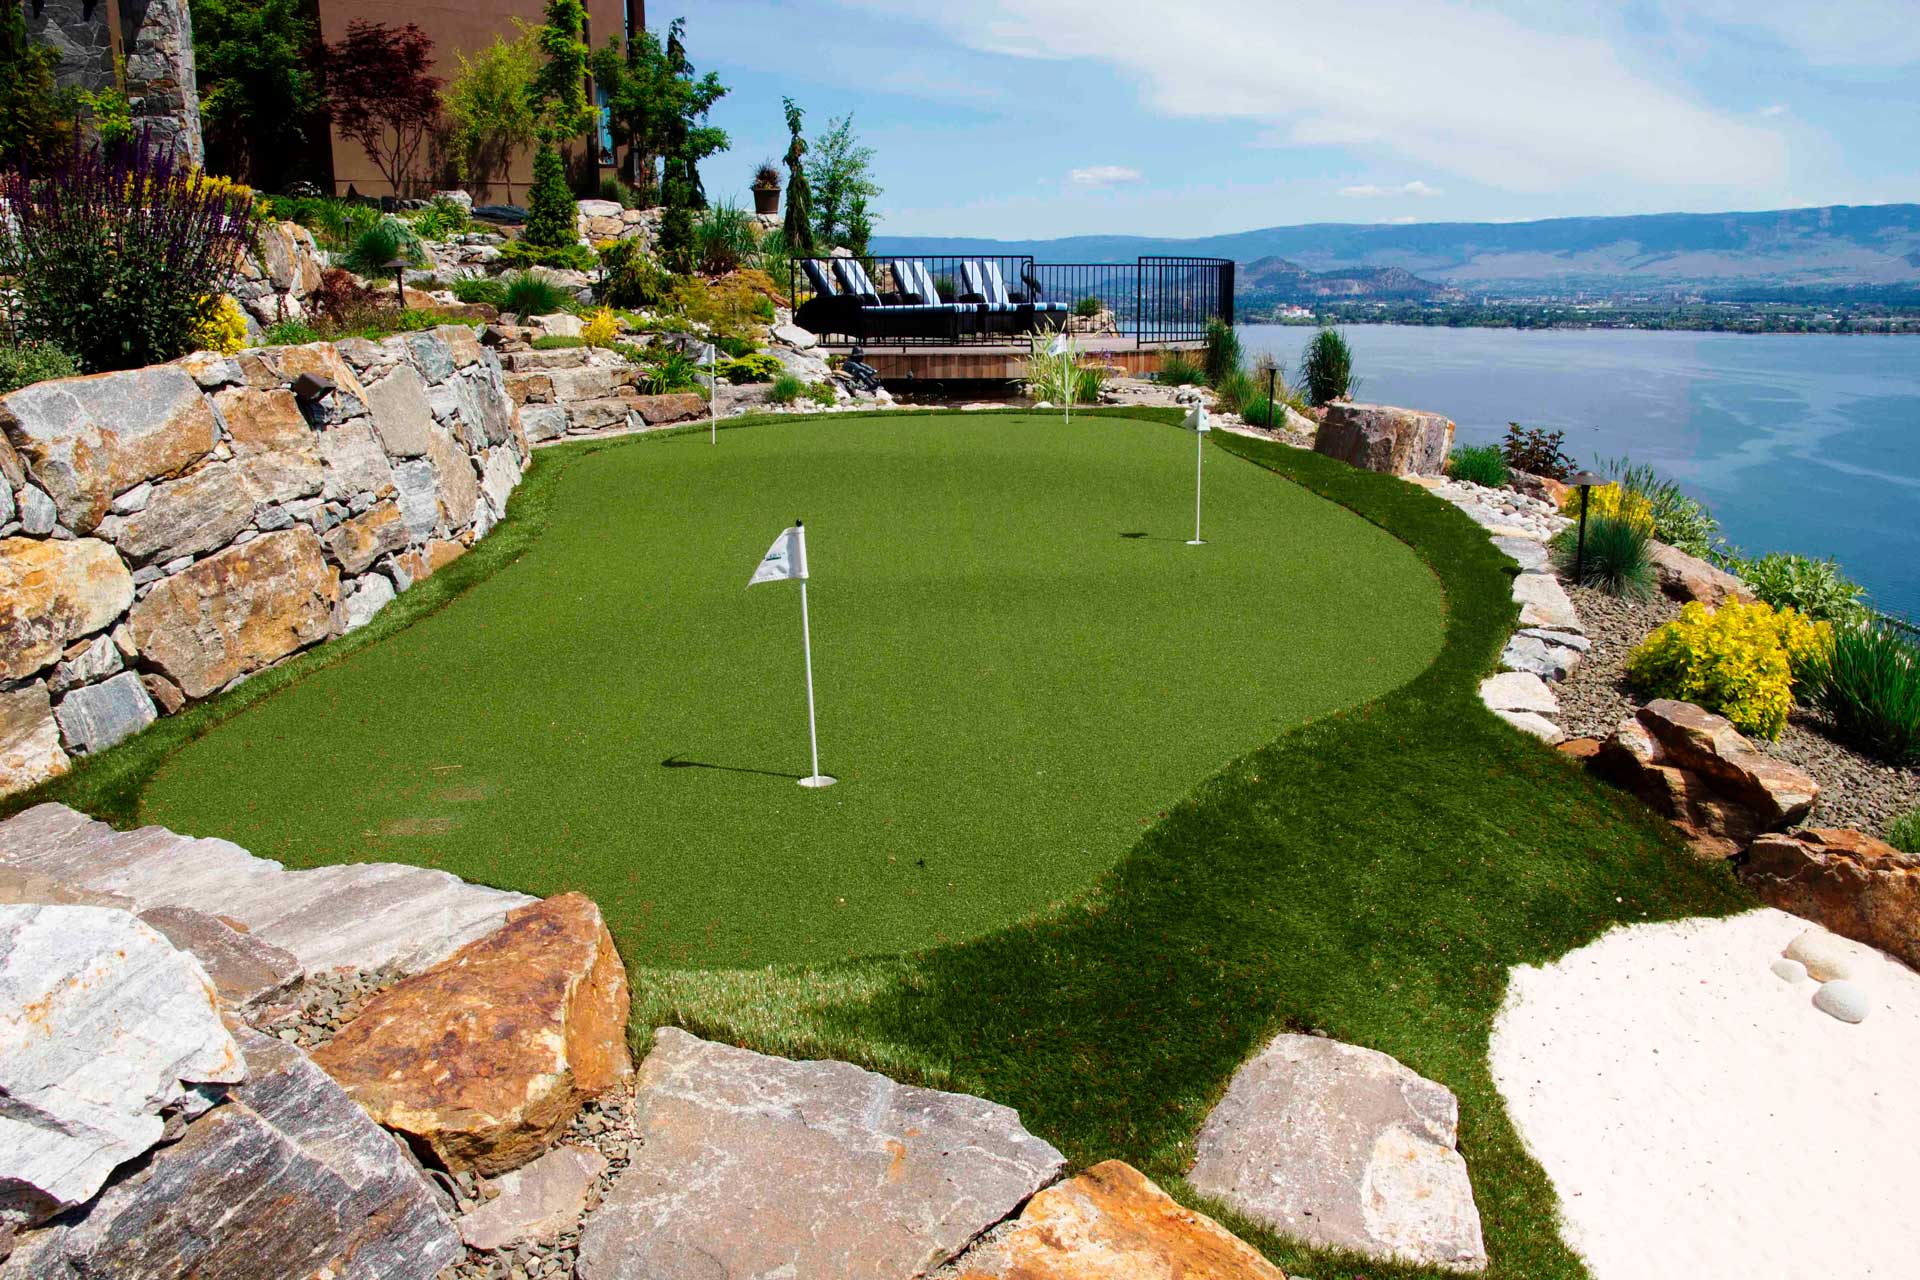 SYNLawn Artificial Turf Golf overlooking water